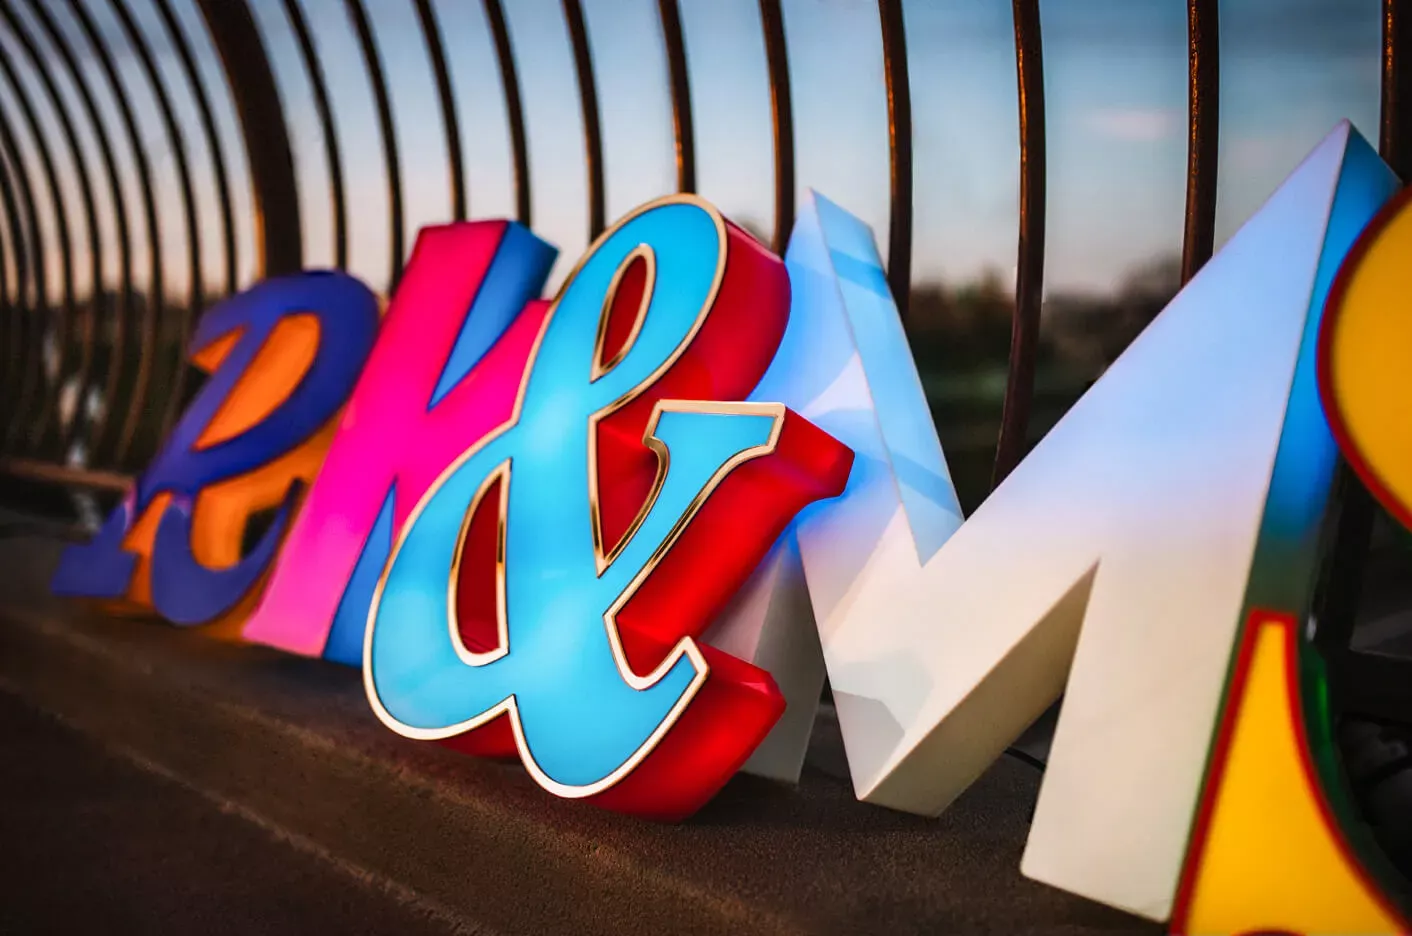 Colorful letters - Illuminated letters made entirely of plexiglass